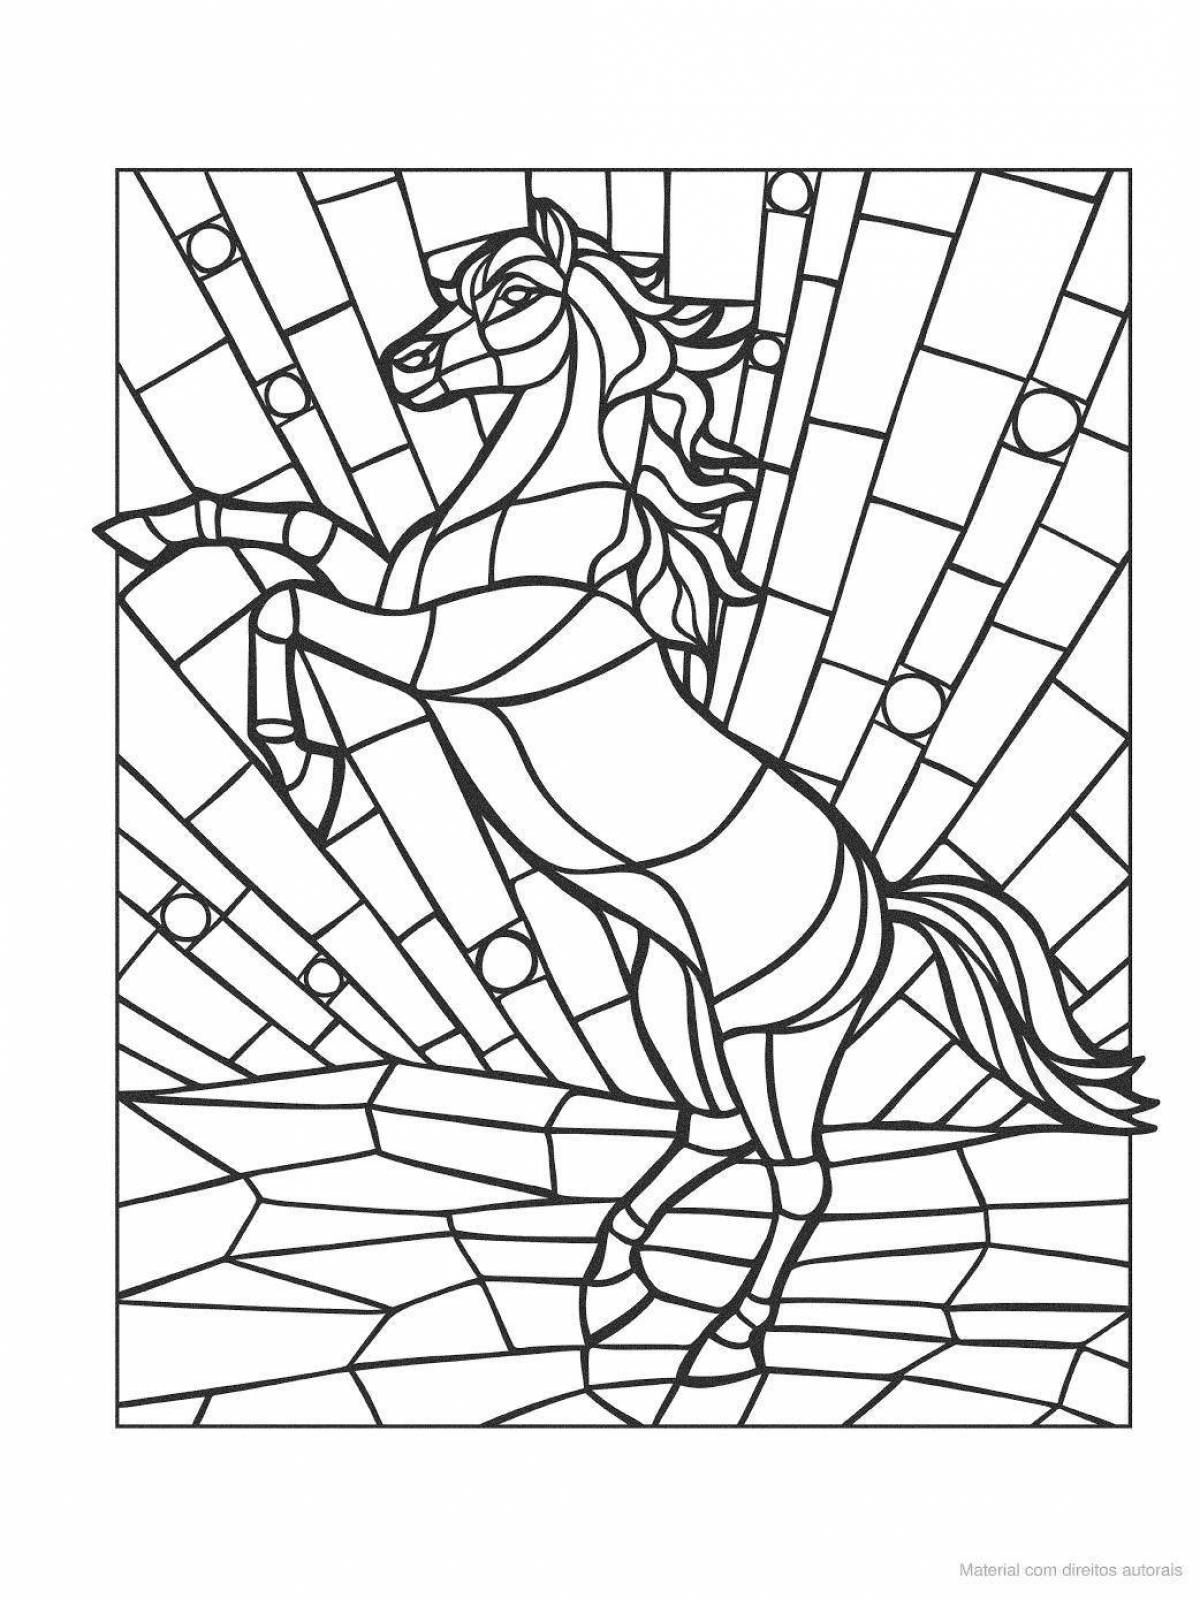 Stained glass coloring book for preschoolers